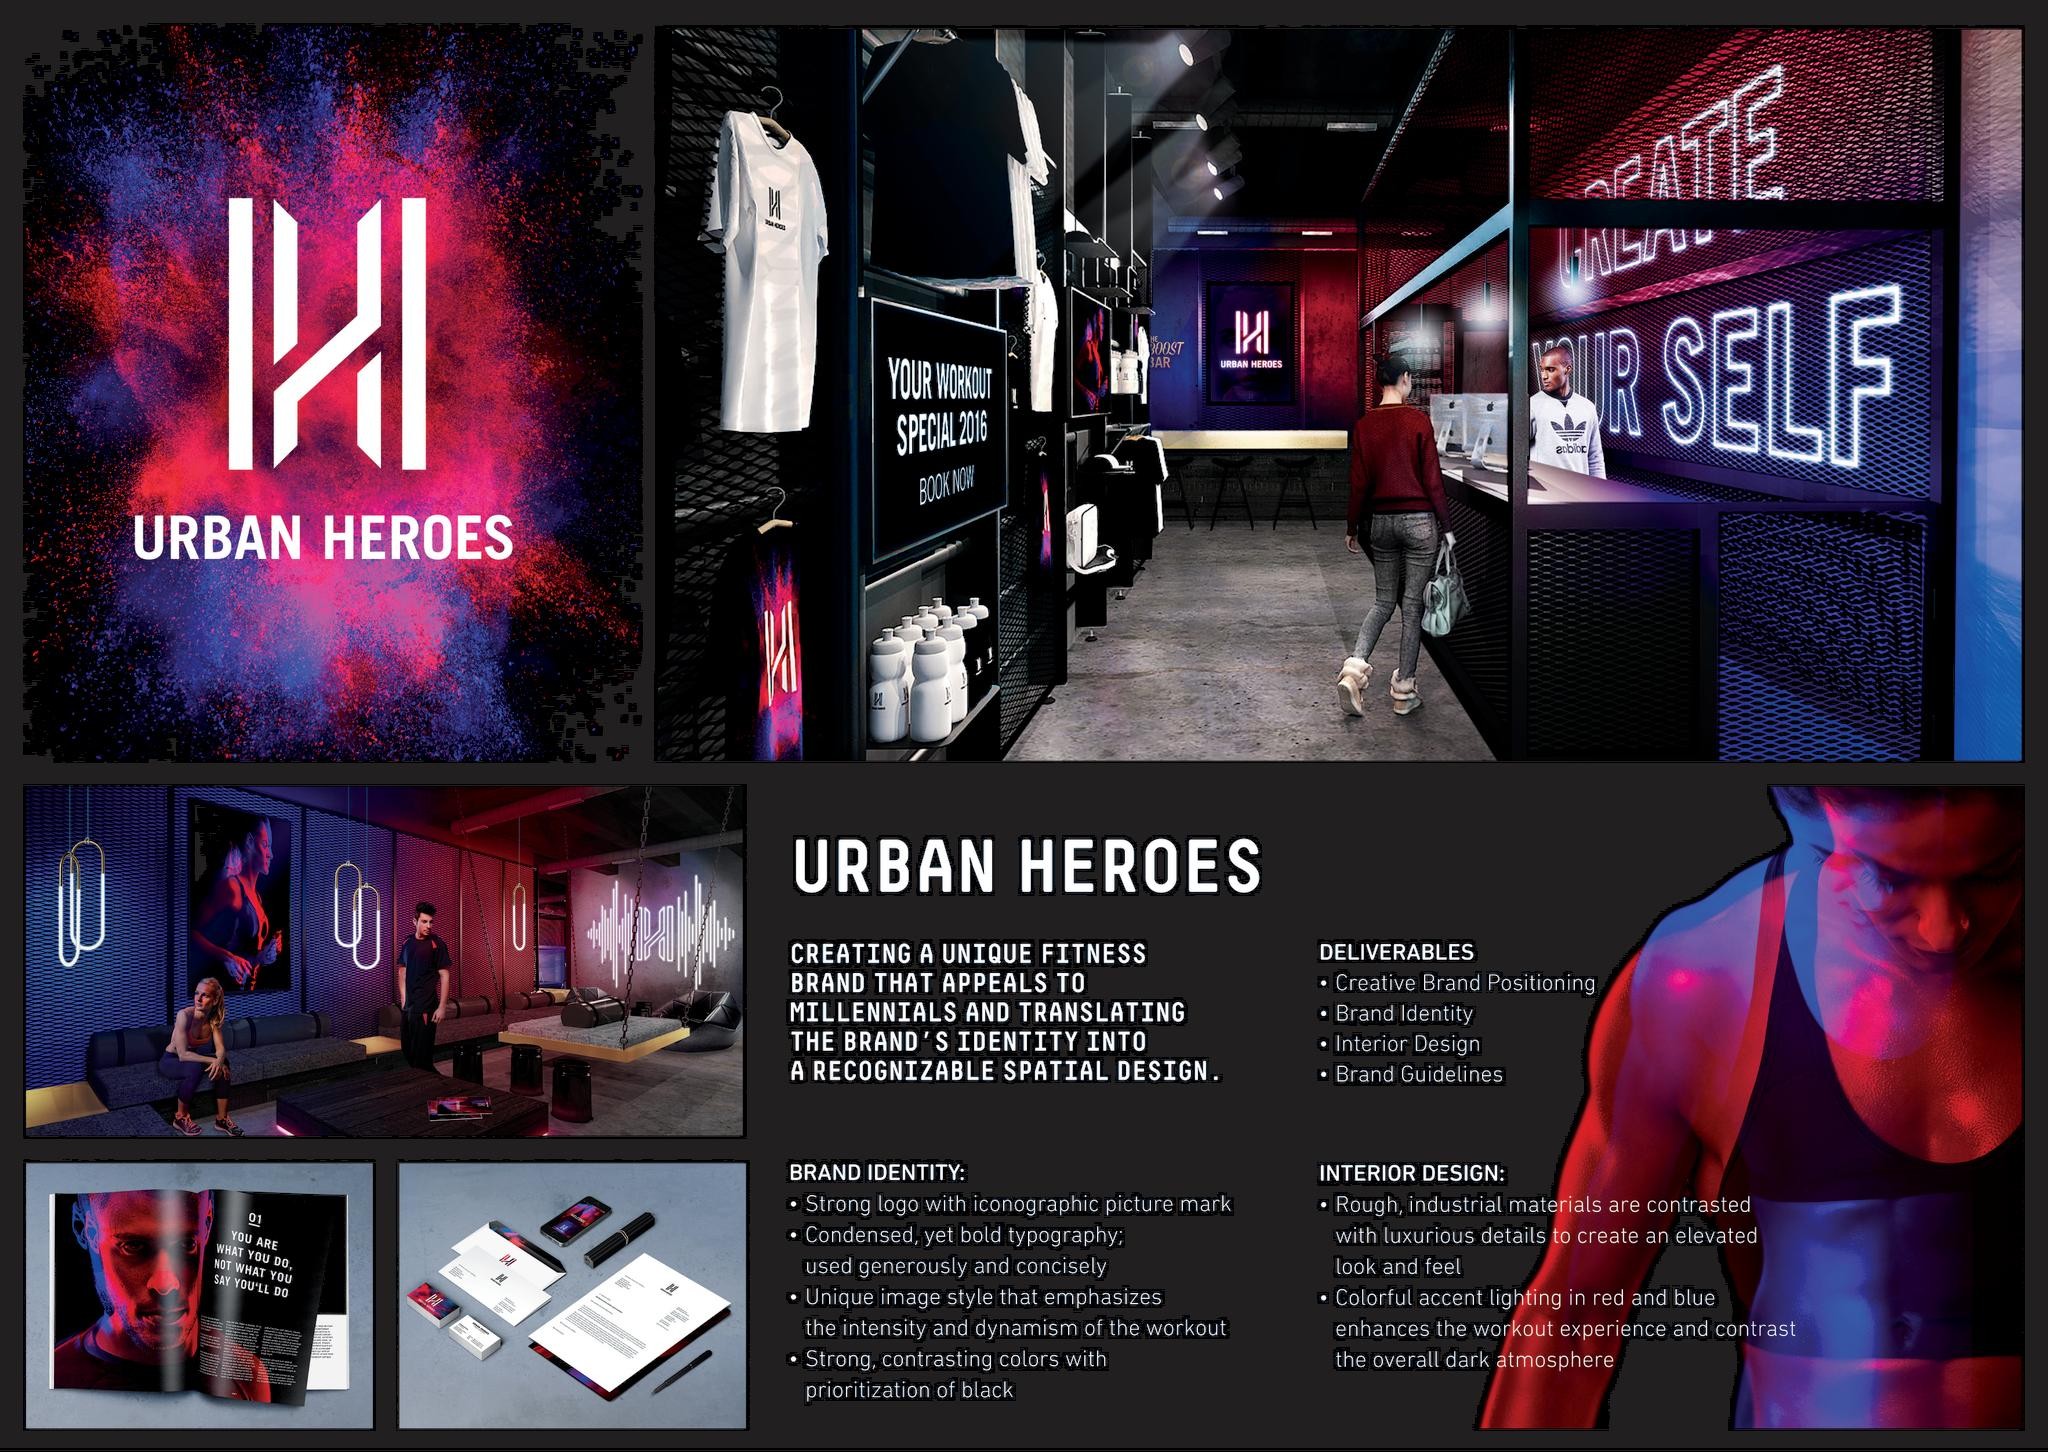 URBAN HEROES – INNOVATING A NEW FITNESS EXPERIENCE